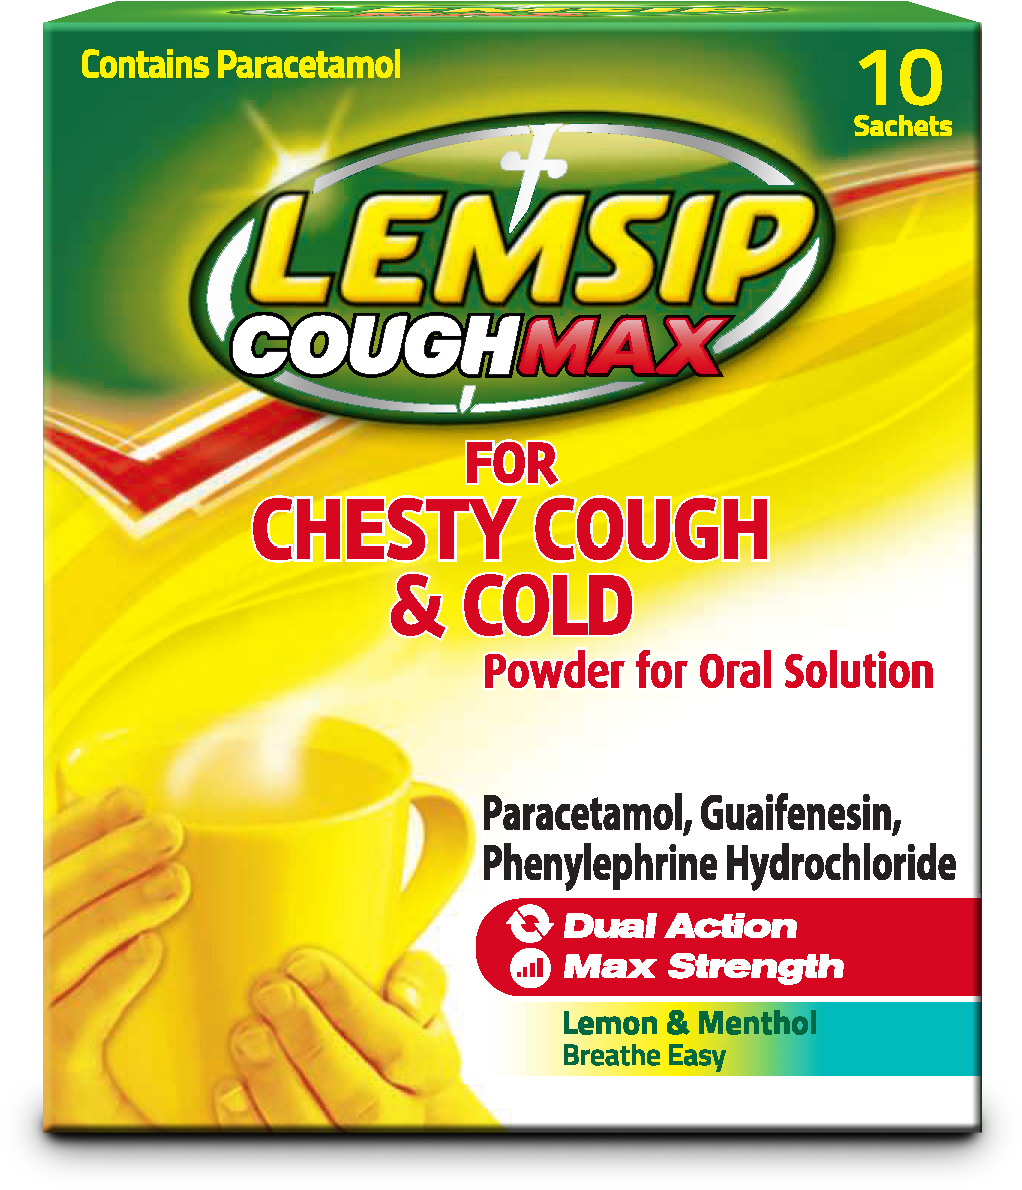 A Package Of Cough Syrup